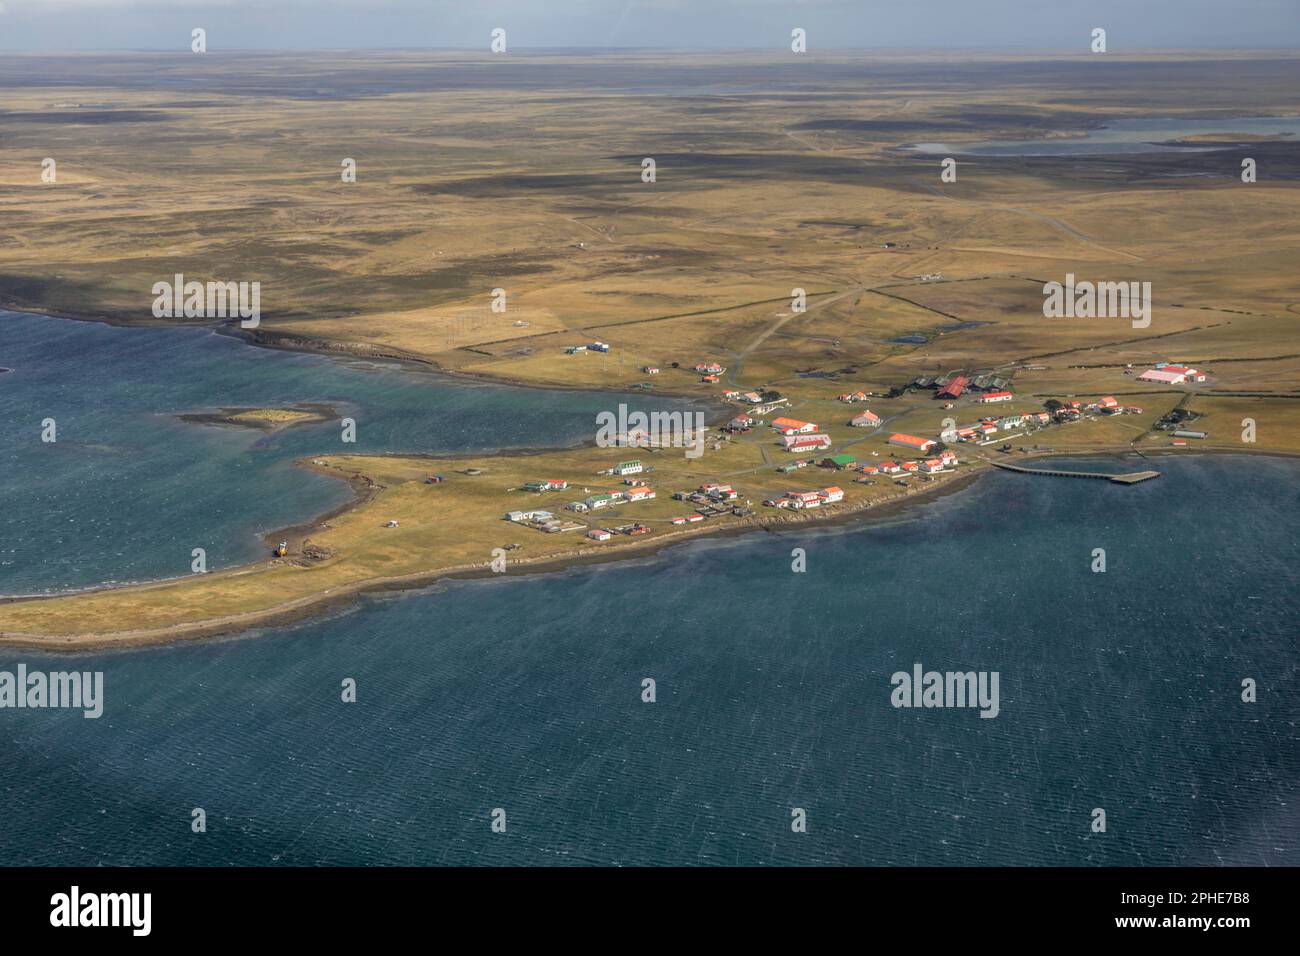 An aerial photograph showing the settlement at Goose Green in The Falkland Islands. Stock Photo